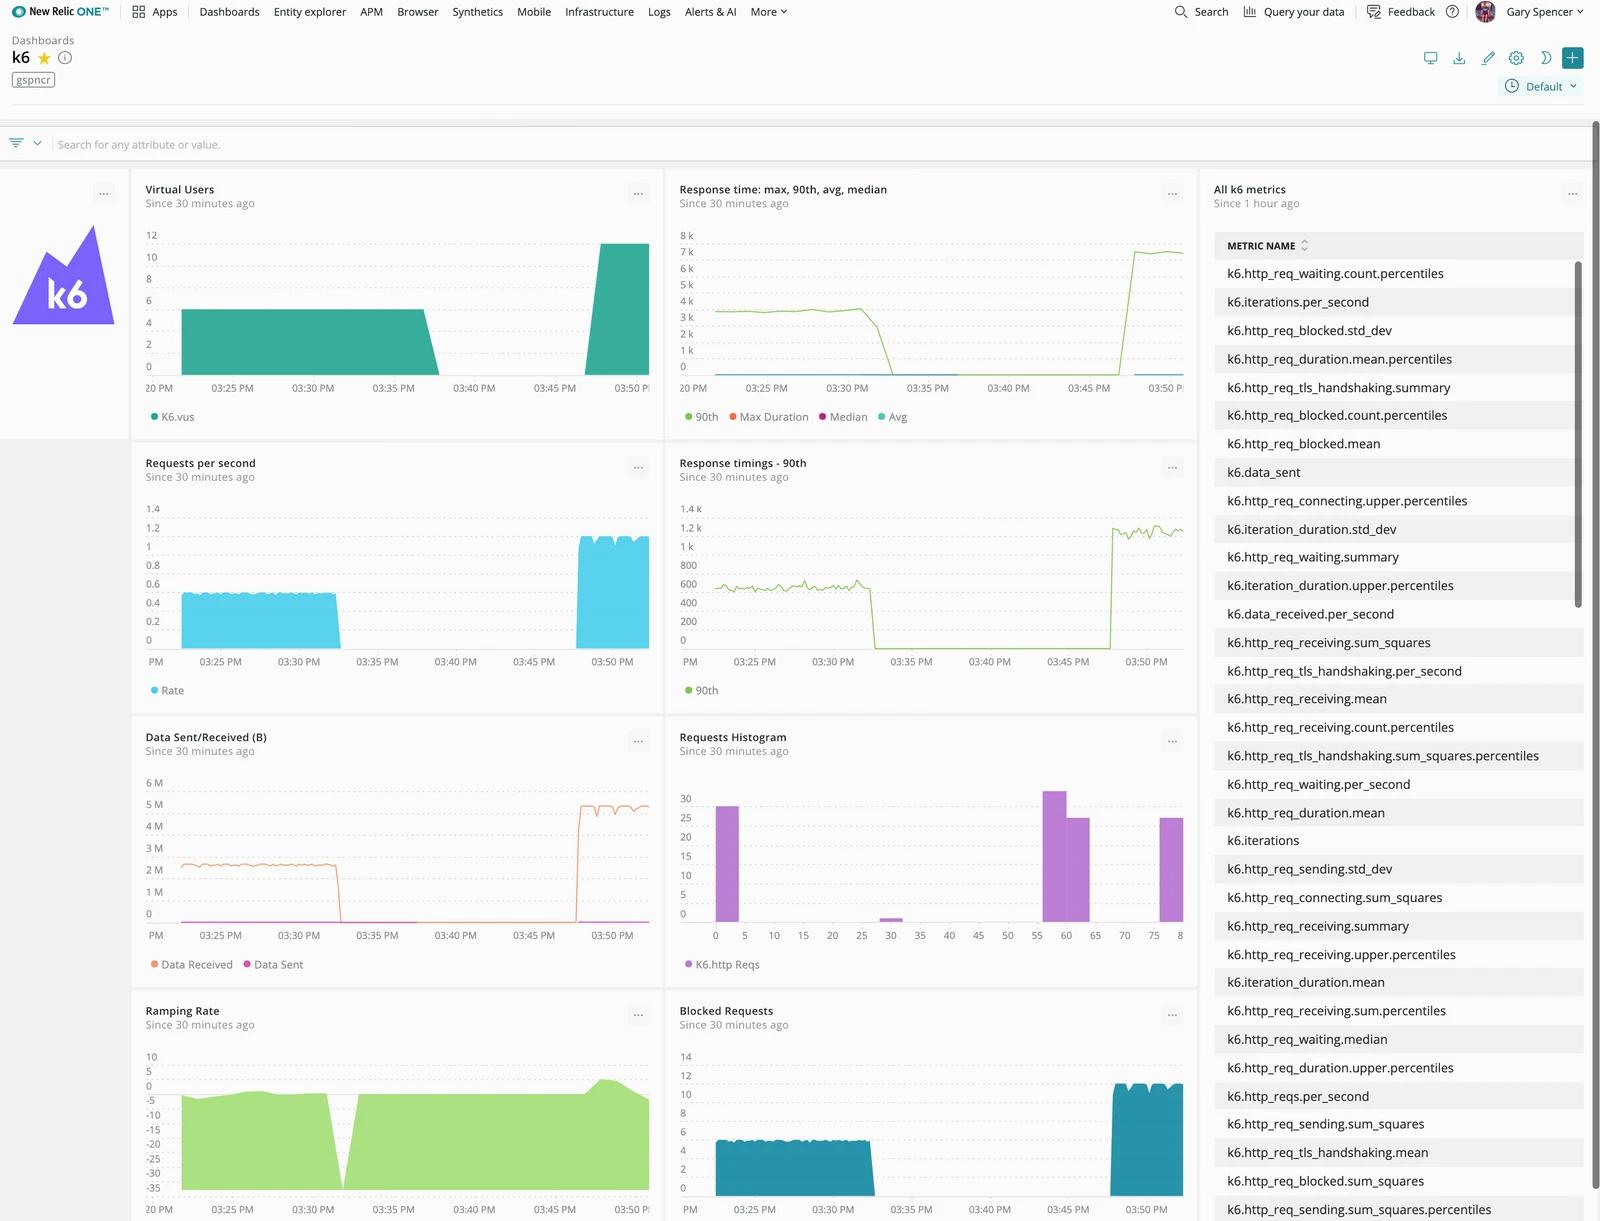 A screenshot of New Relic metrics visualized in k6